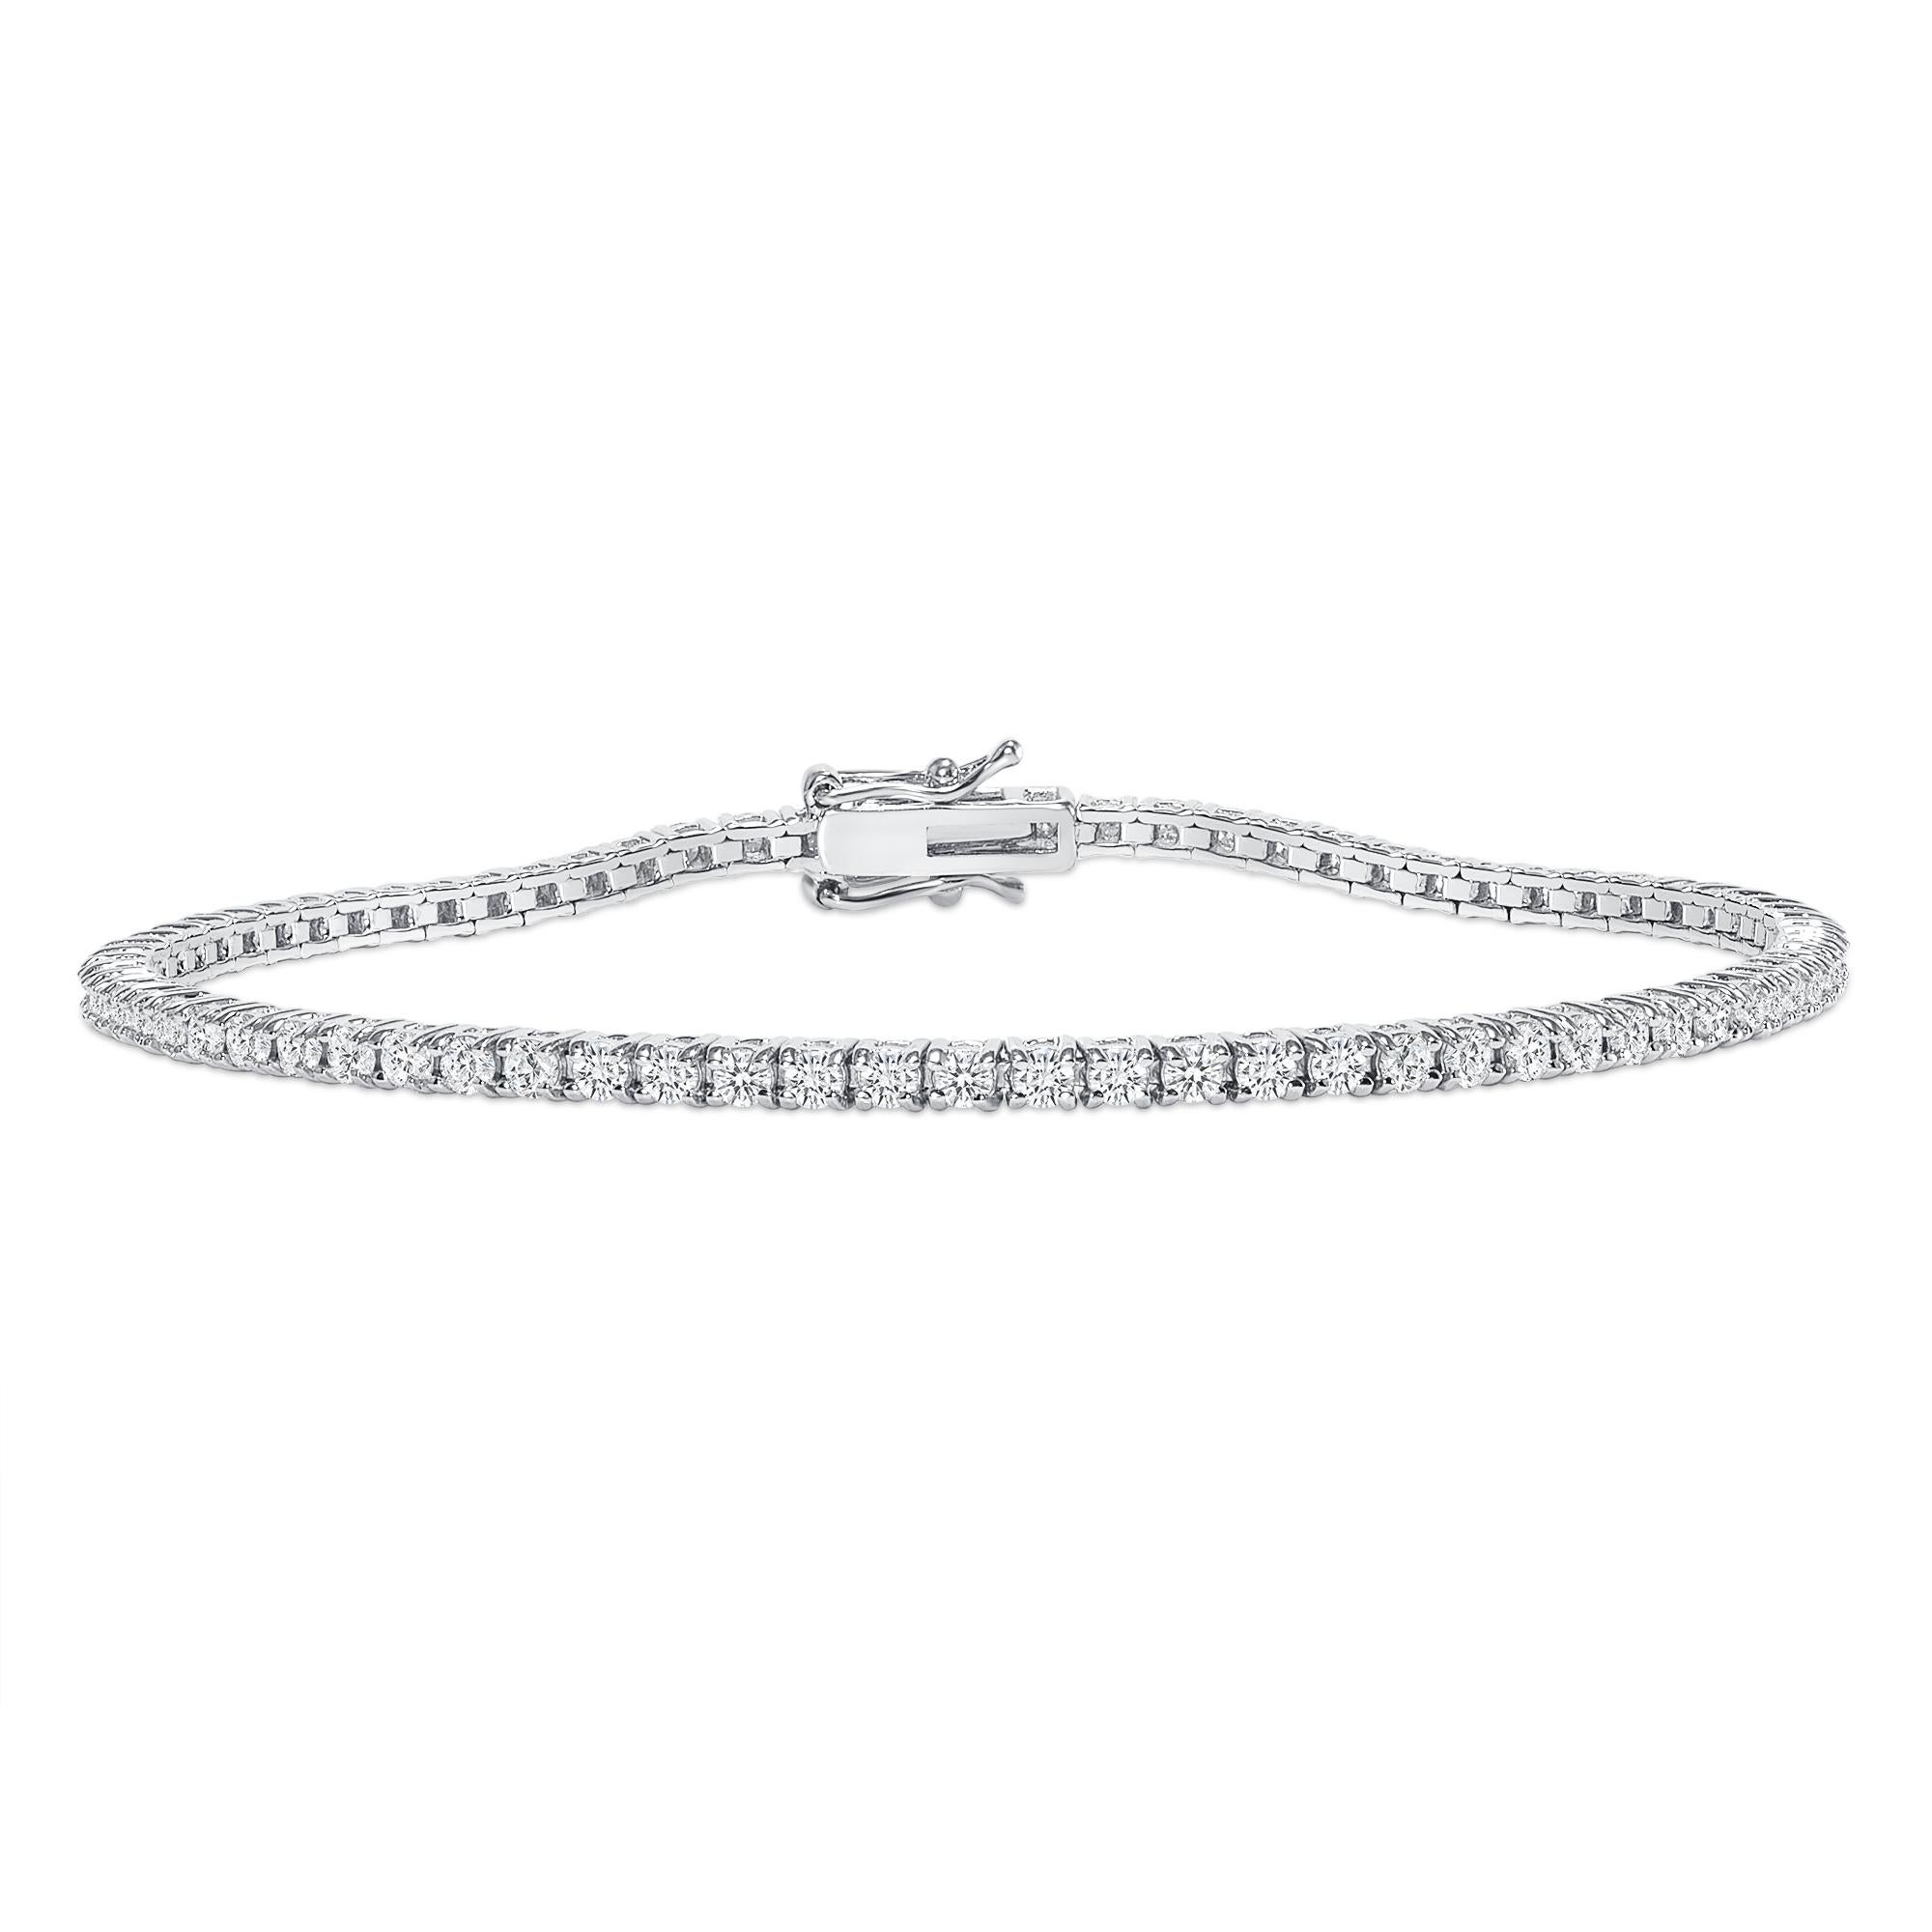 This diamond tennis bracelet features beautifully cut round diamonds set gorgeously in 14k gold.

Metal: 14k Gold
Diamond Cut: Round Natural Diamond 
Total Diamond Carats: 2ct
Diamond Clarity: VS
Diamond Color: F-G
Color: White Gold
Bracelet Length: